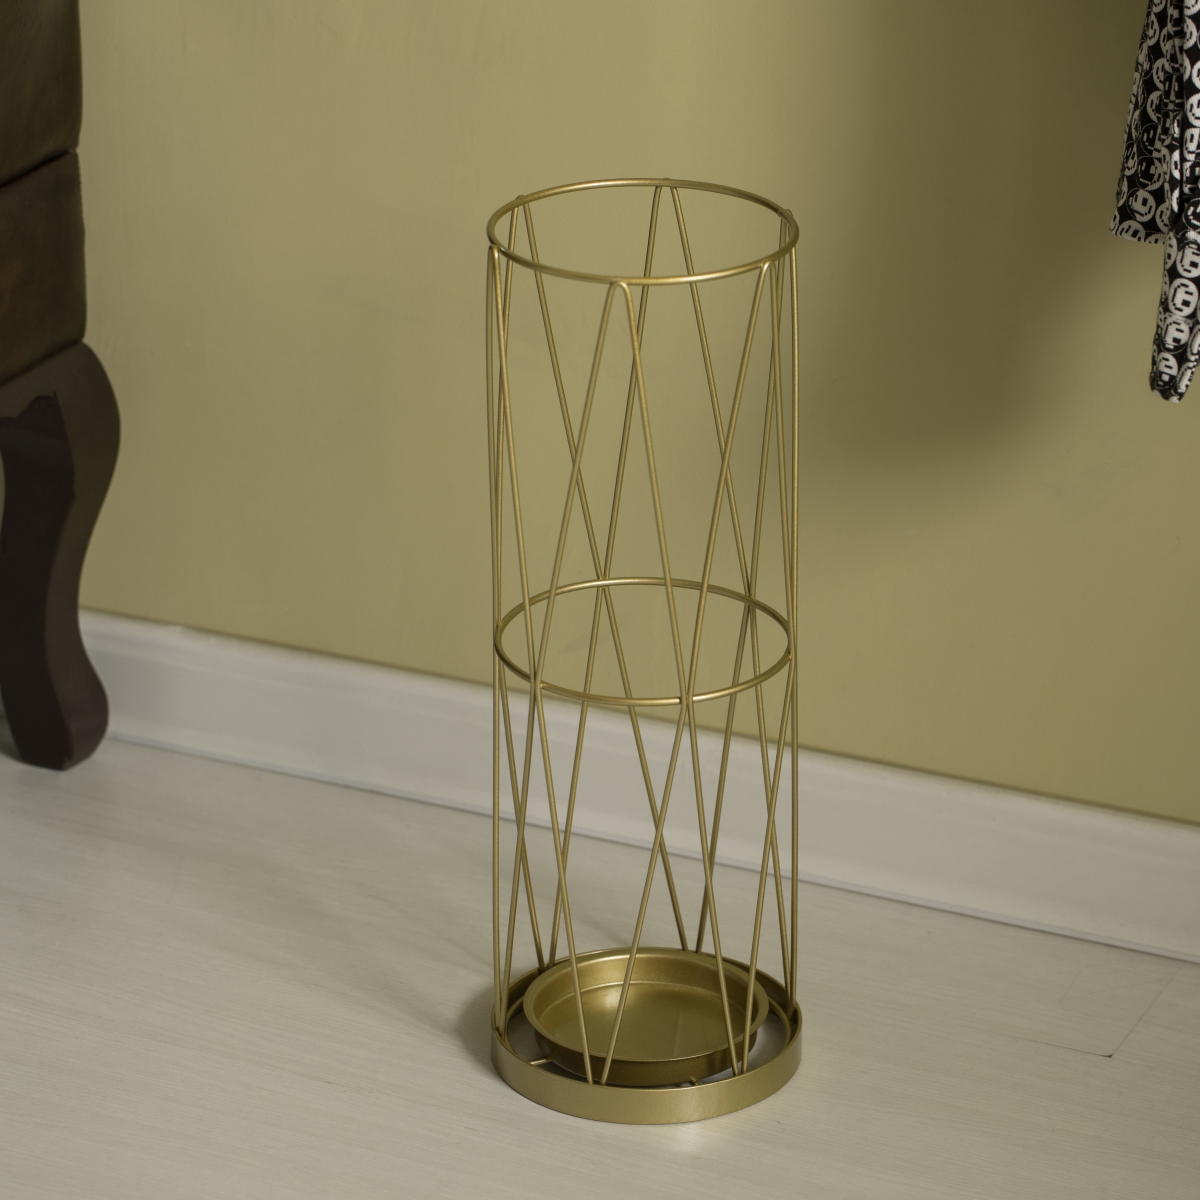 Picture of Vintiquewise QI004470 Gold Round Vertical Design Umbrella Holder Stand for Indoor and Outdoor with Drip Water Tray